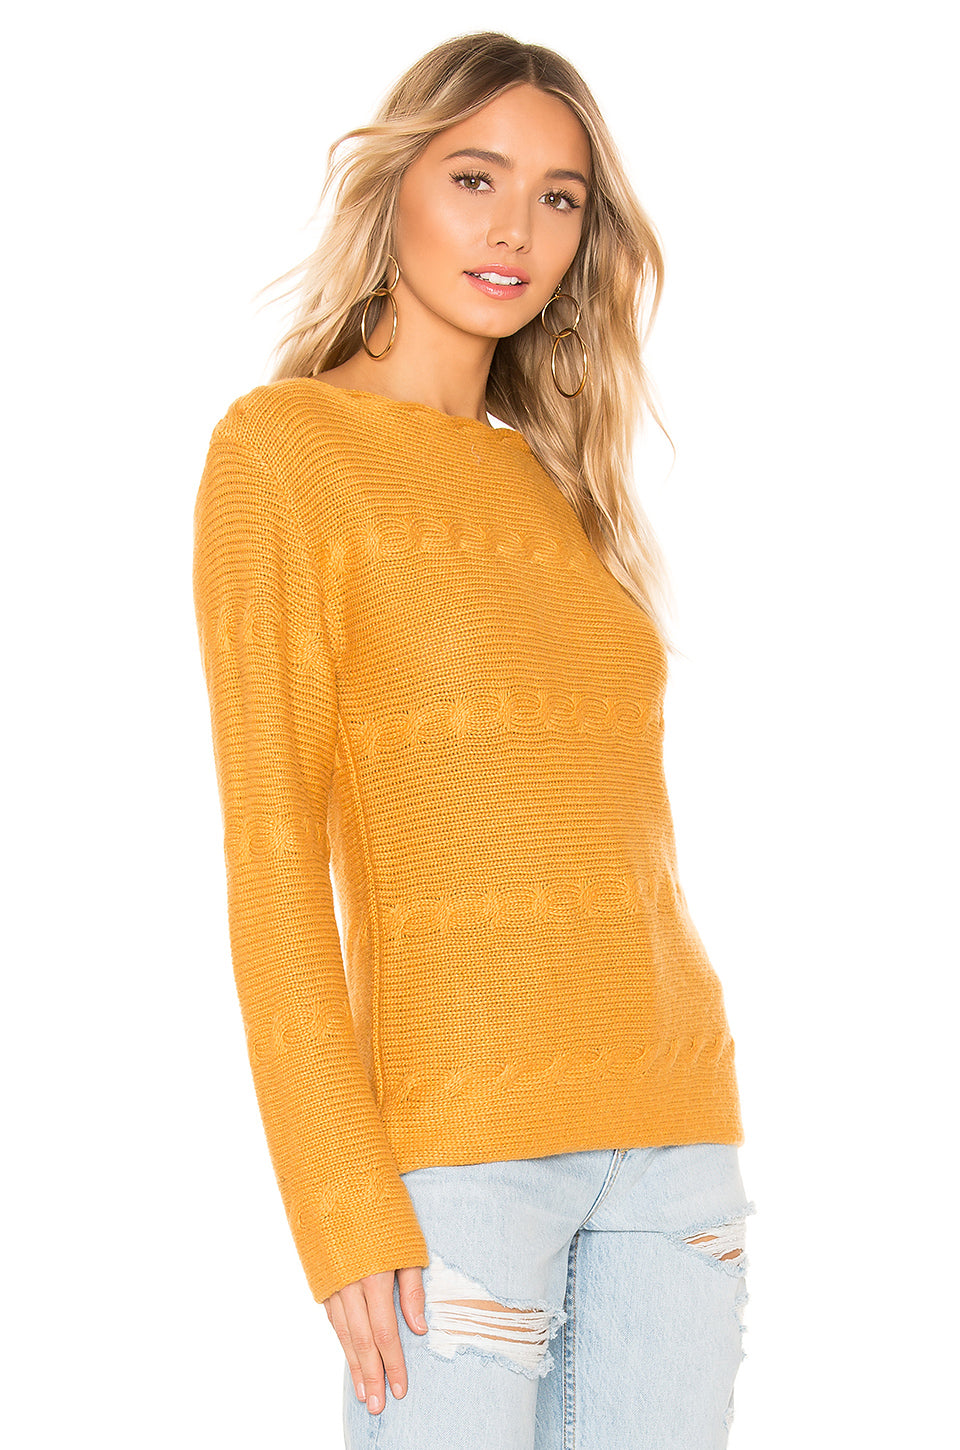 Show Sweater in DEEP YELLOW